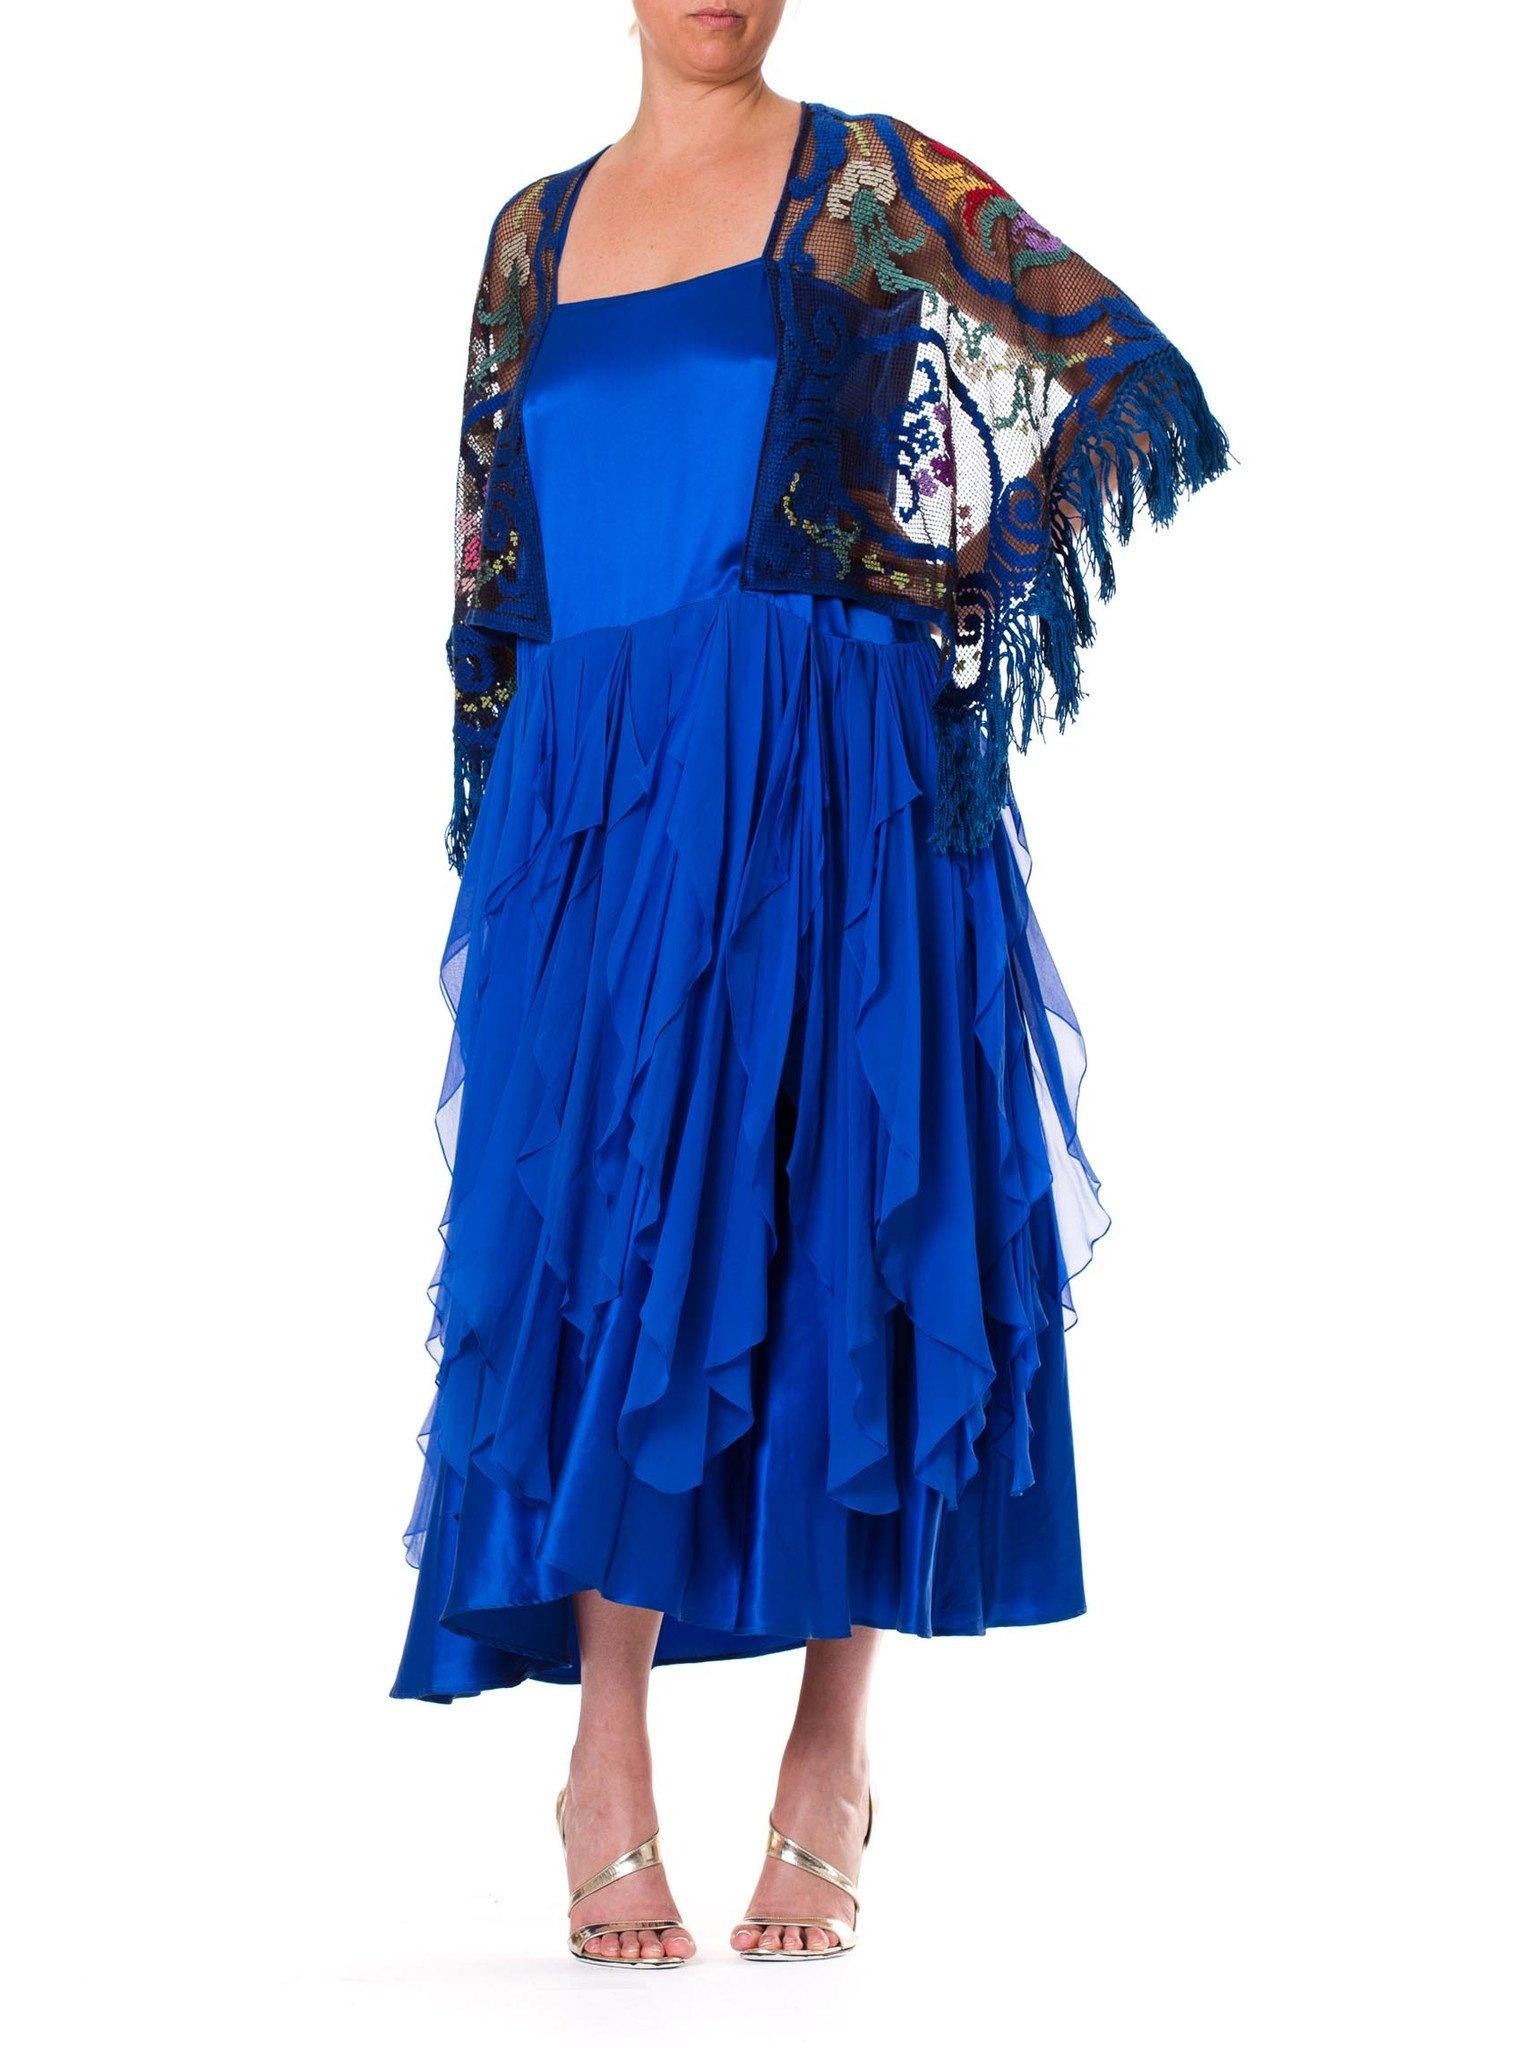 Blue Silk Charmeuse  & Chiffon Dress With Antique Lace Sleeves For Sale 3